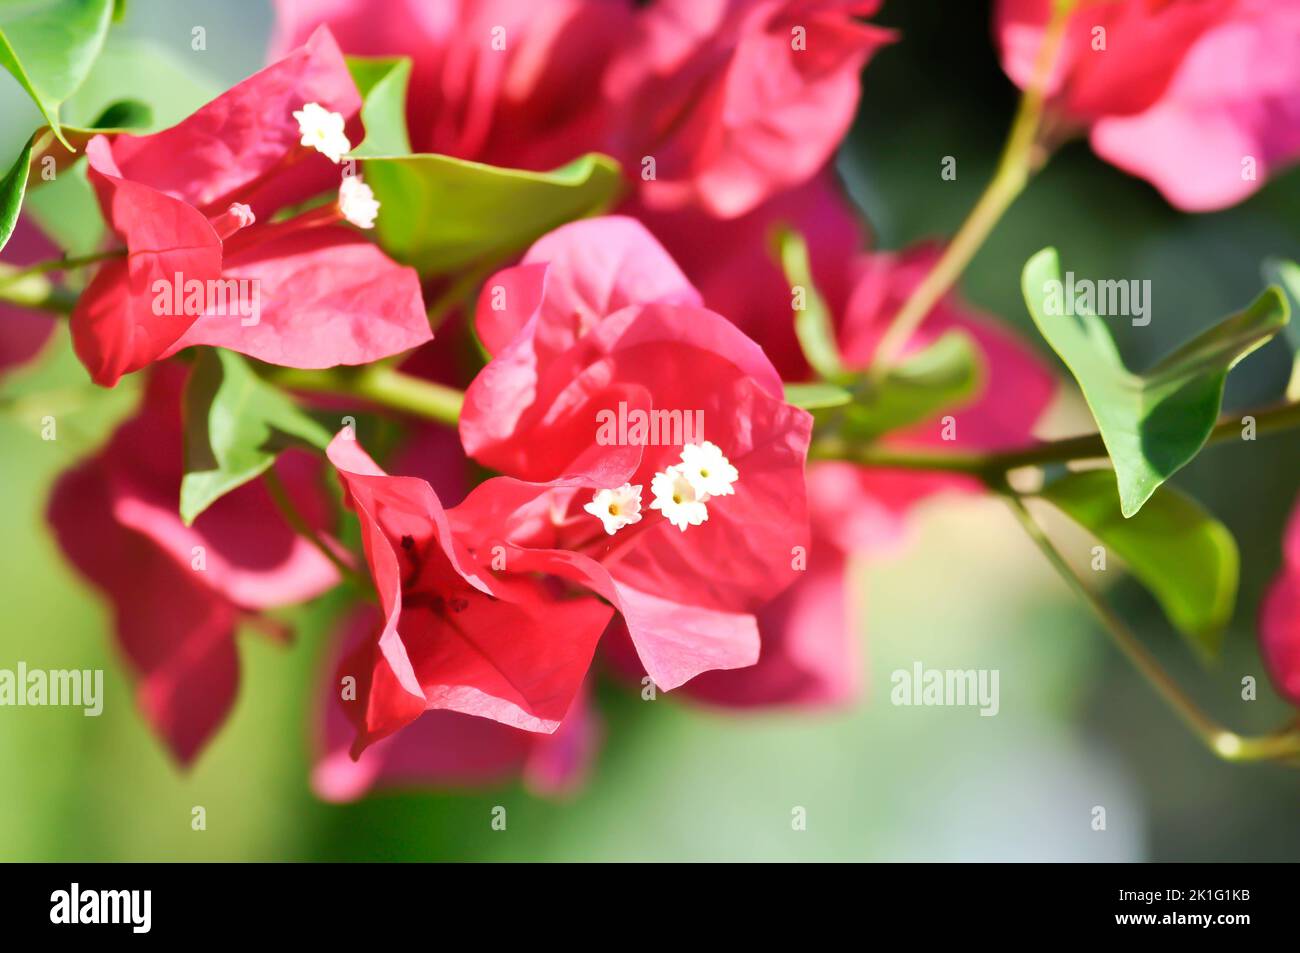 Bougainvillea or paper flower , red paper flower or red flower Stock Photo